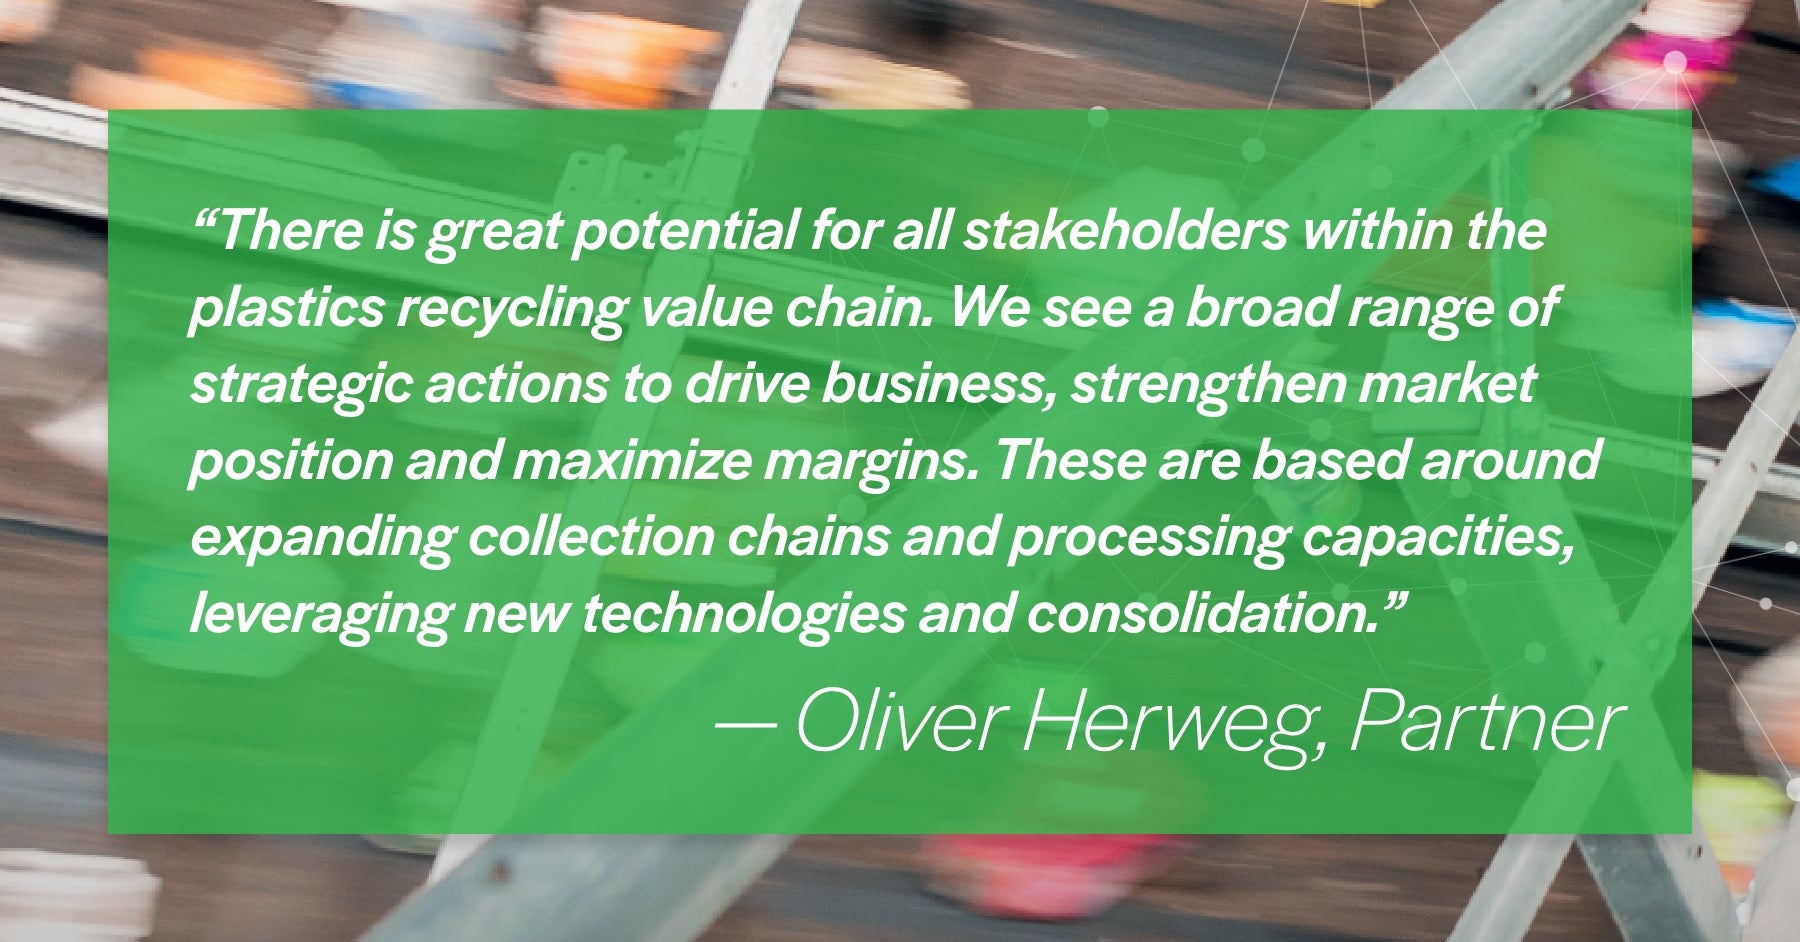 'There is great potential for all stakeholders within the plastics recycling value chain. We see a broad range of strategic actions to drive business, strengthen market position and maximize margins. These are based around expanding collection chains and processing capacities, leveraging new technologies and consolidation.' Oliver Herweg Partner 